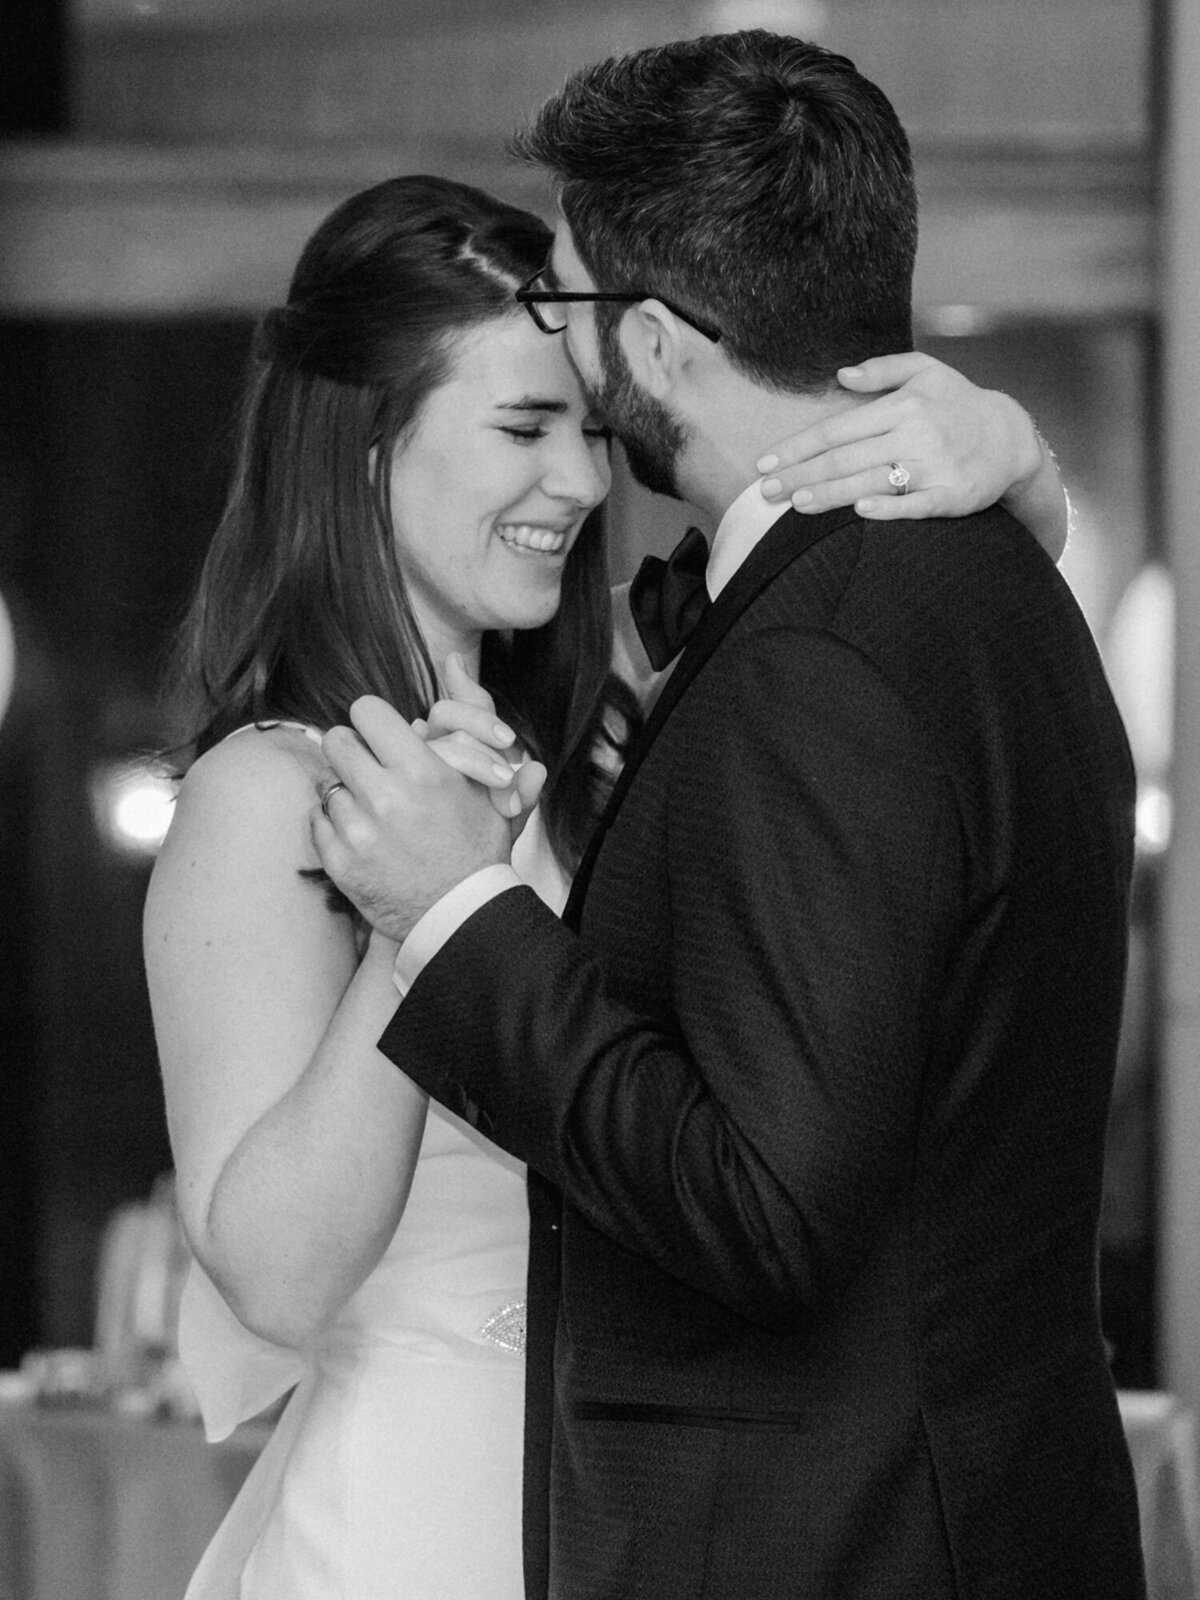 A black and white first dance photo captured at the Ivy Room in Chicago